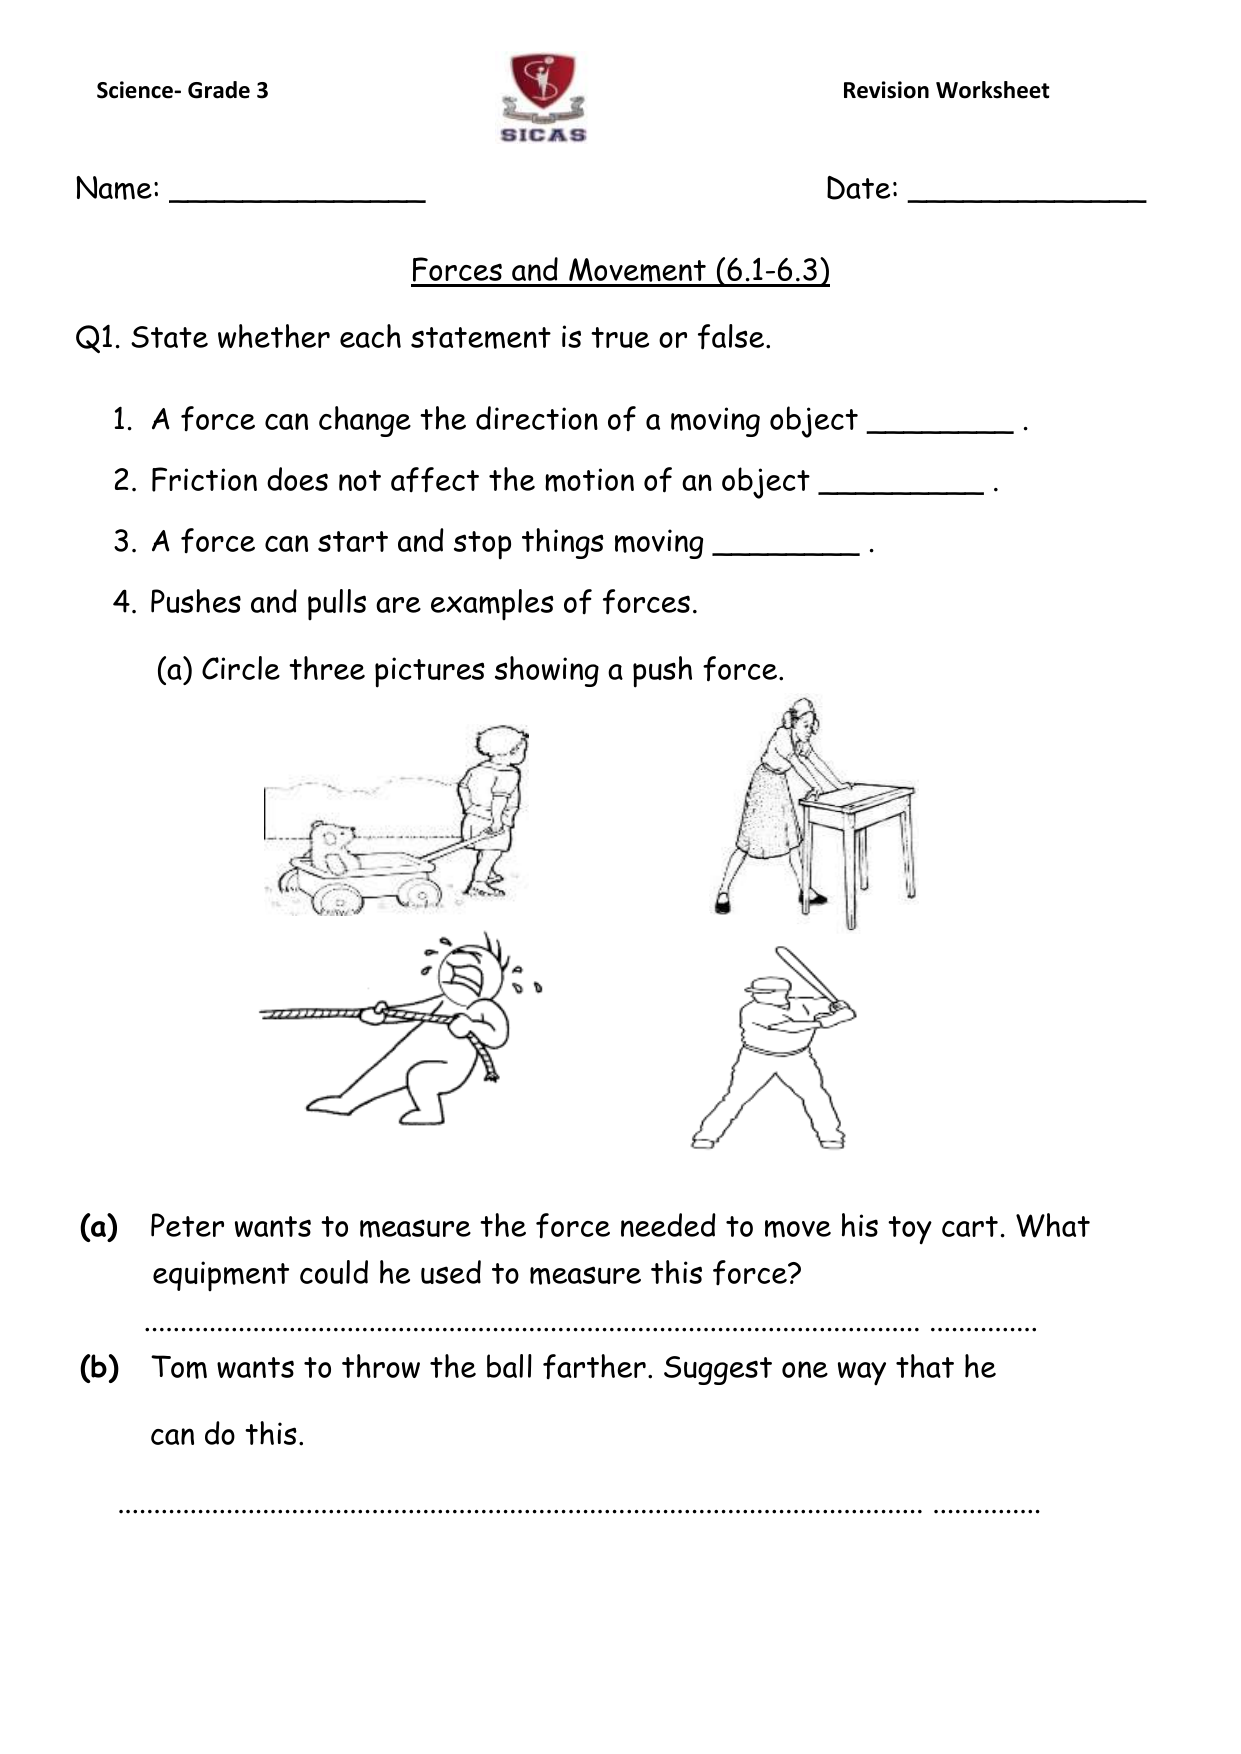 Forces and Movement Within Force And Motion Worksheet Answers